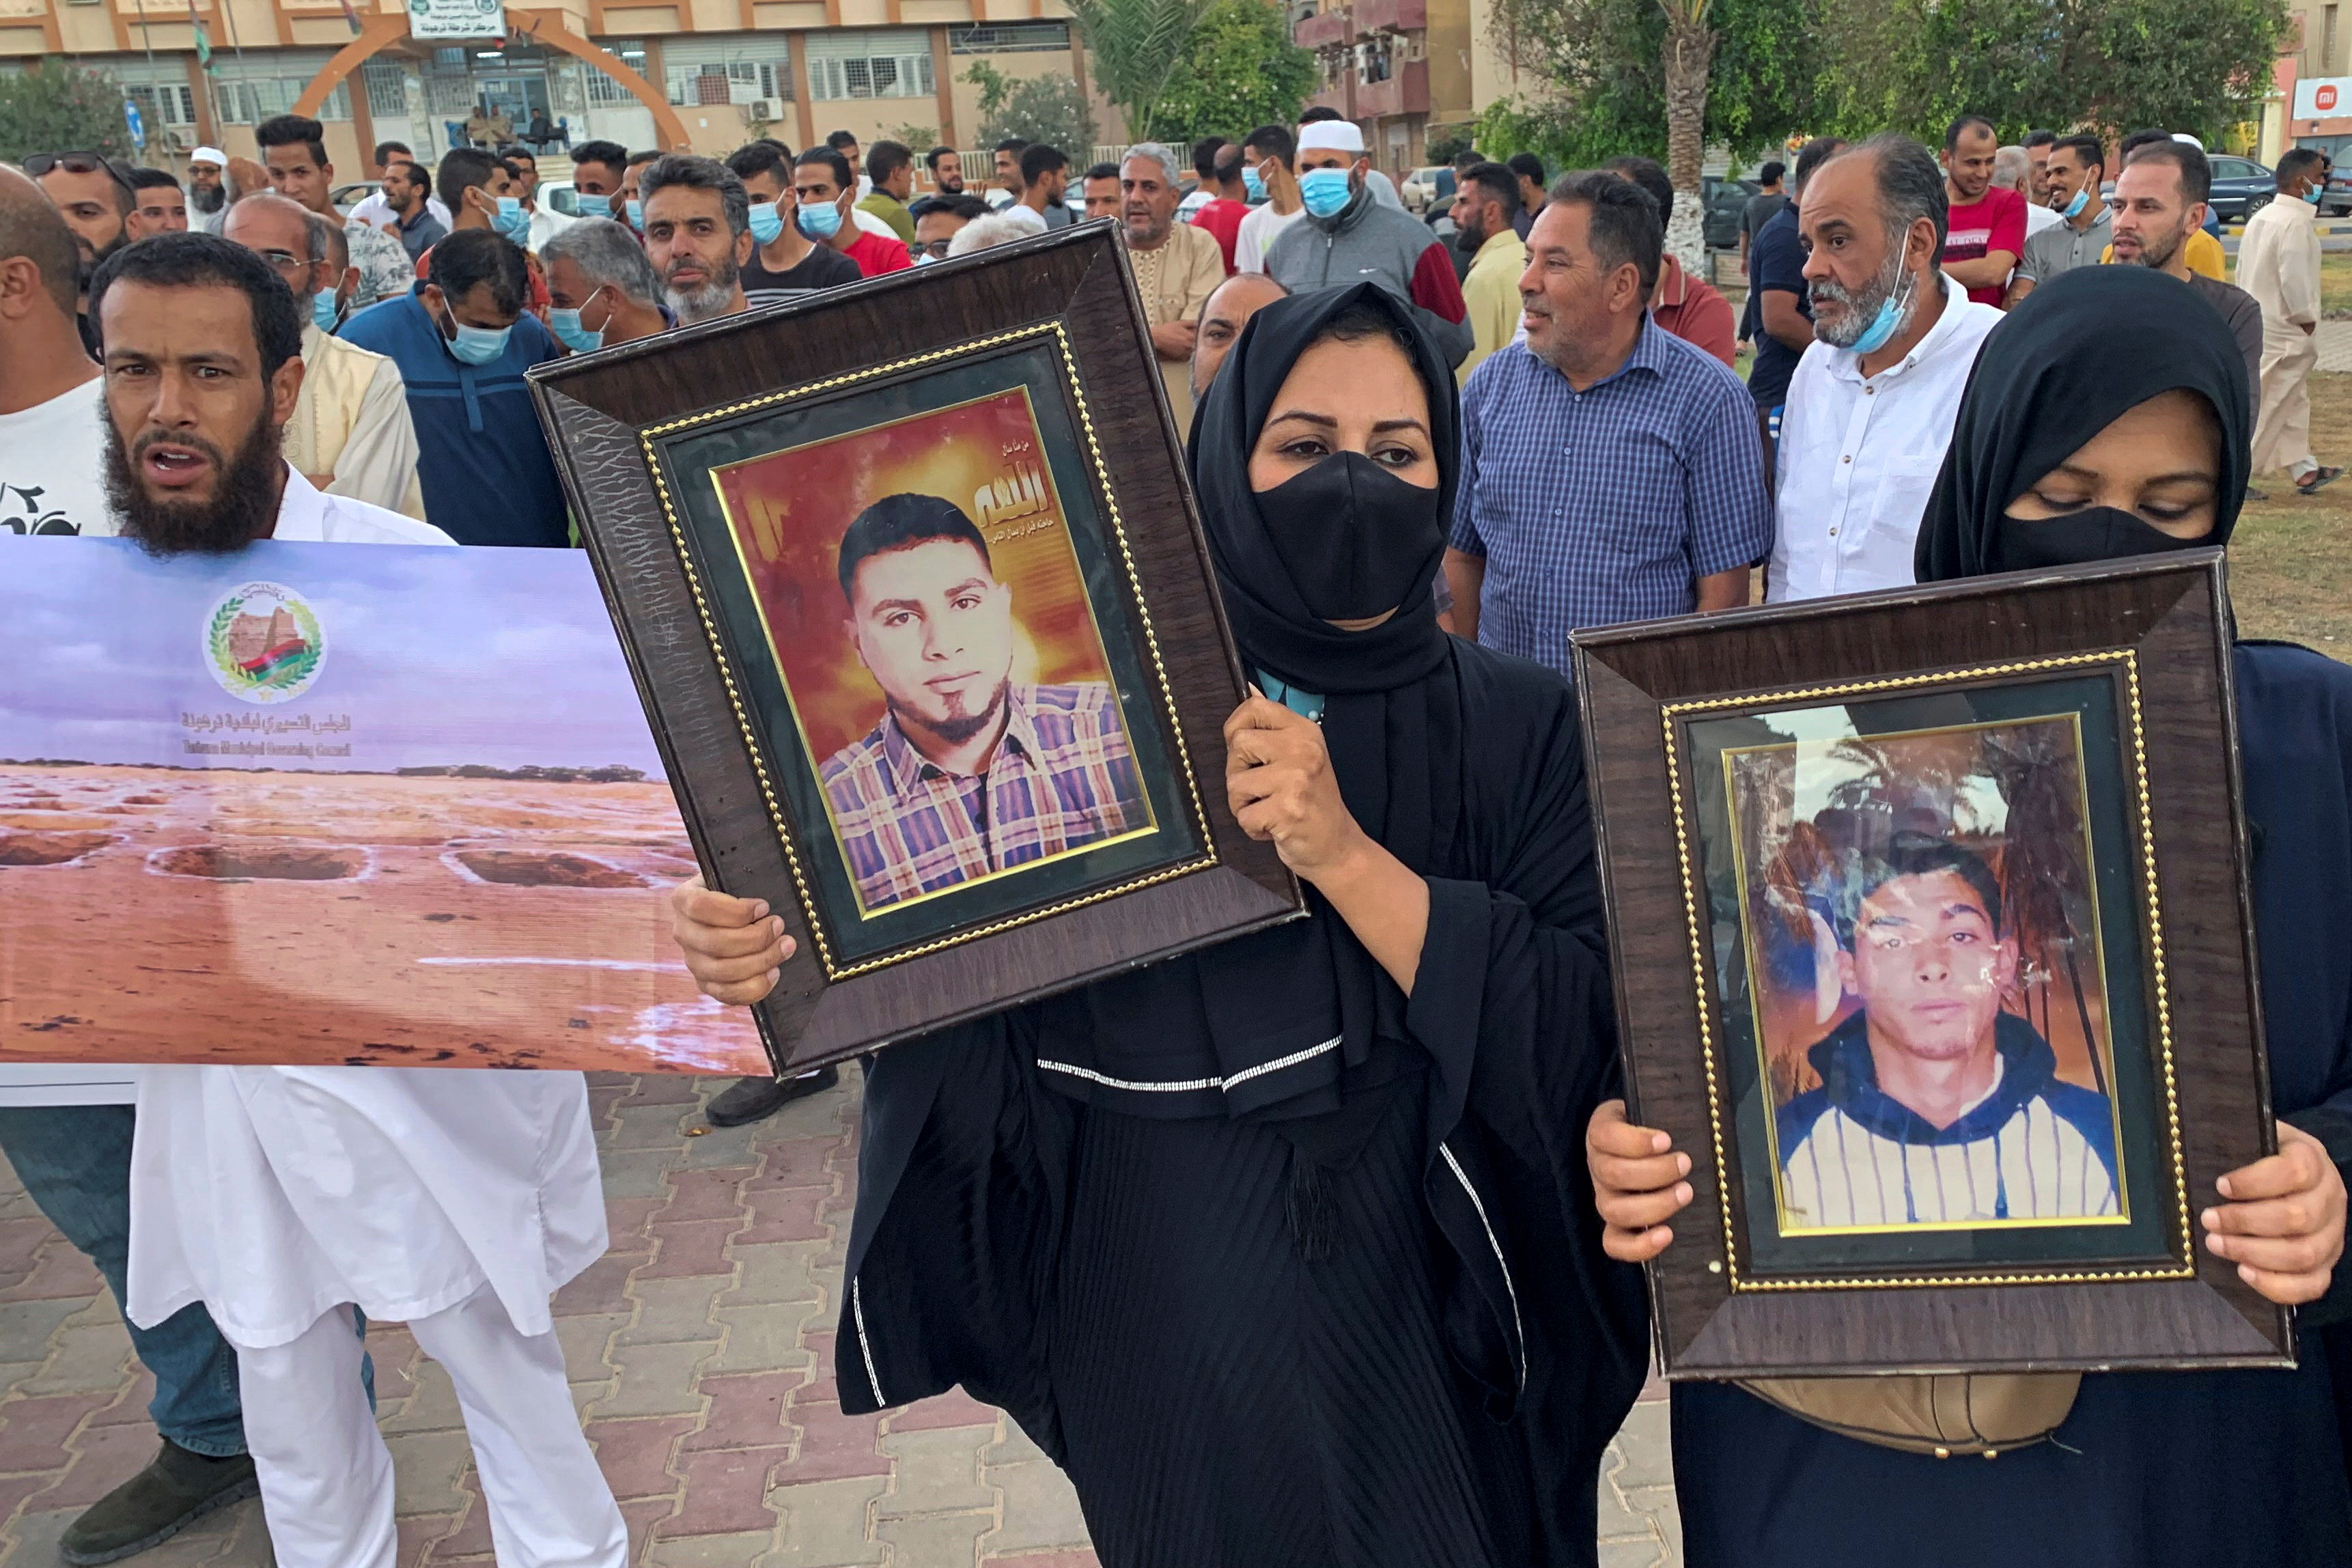 Families hold pictures of victims as they demand justice for missing loved ones and mass graves in Tarhouna, Libya